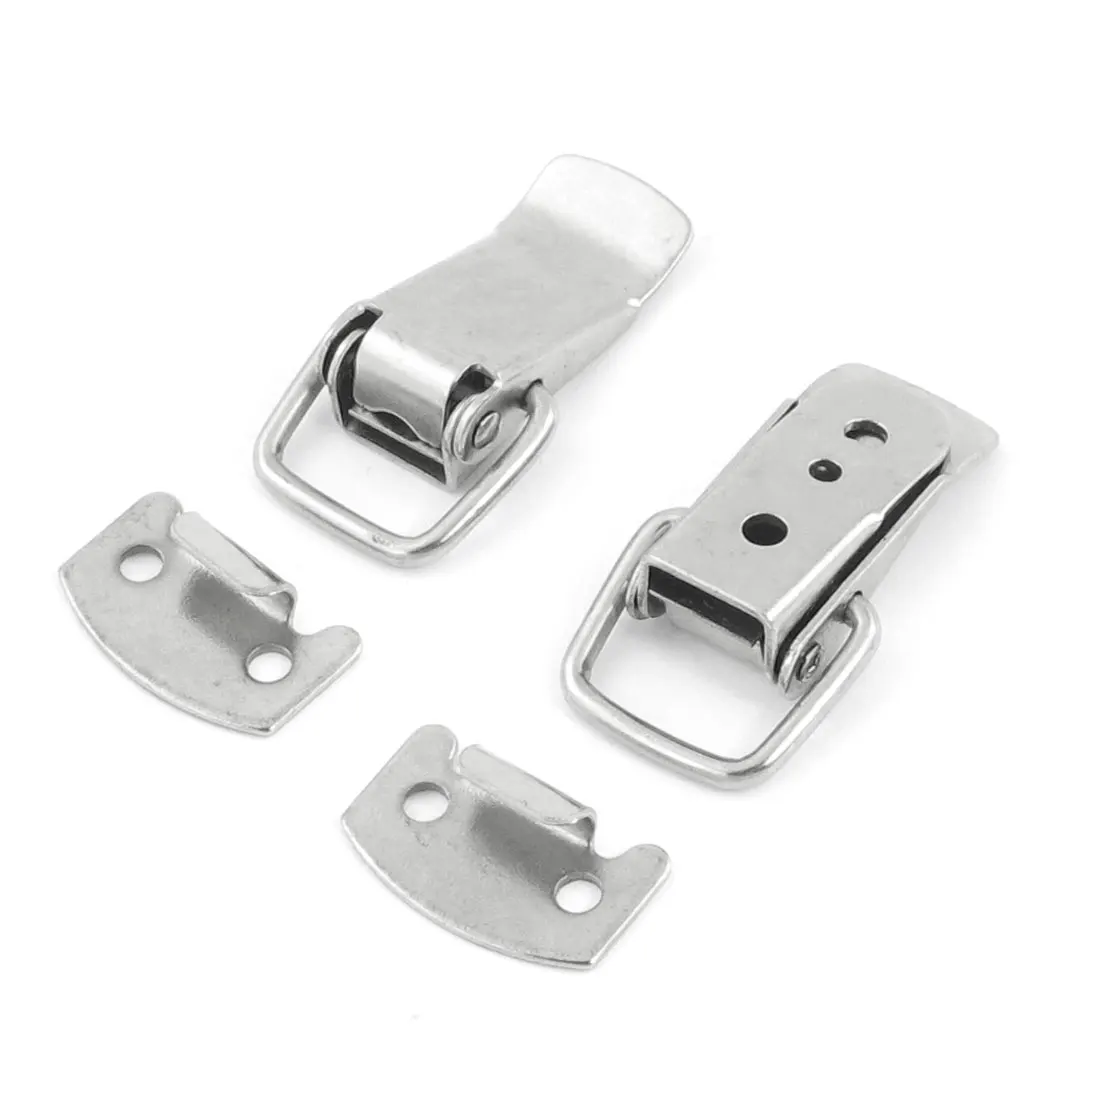 Box Chest Case Spring Loaded Sillver Tone Draw Toggle Latch 4 Pcs